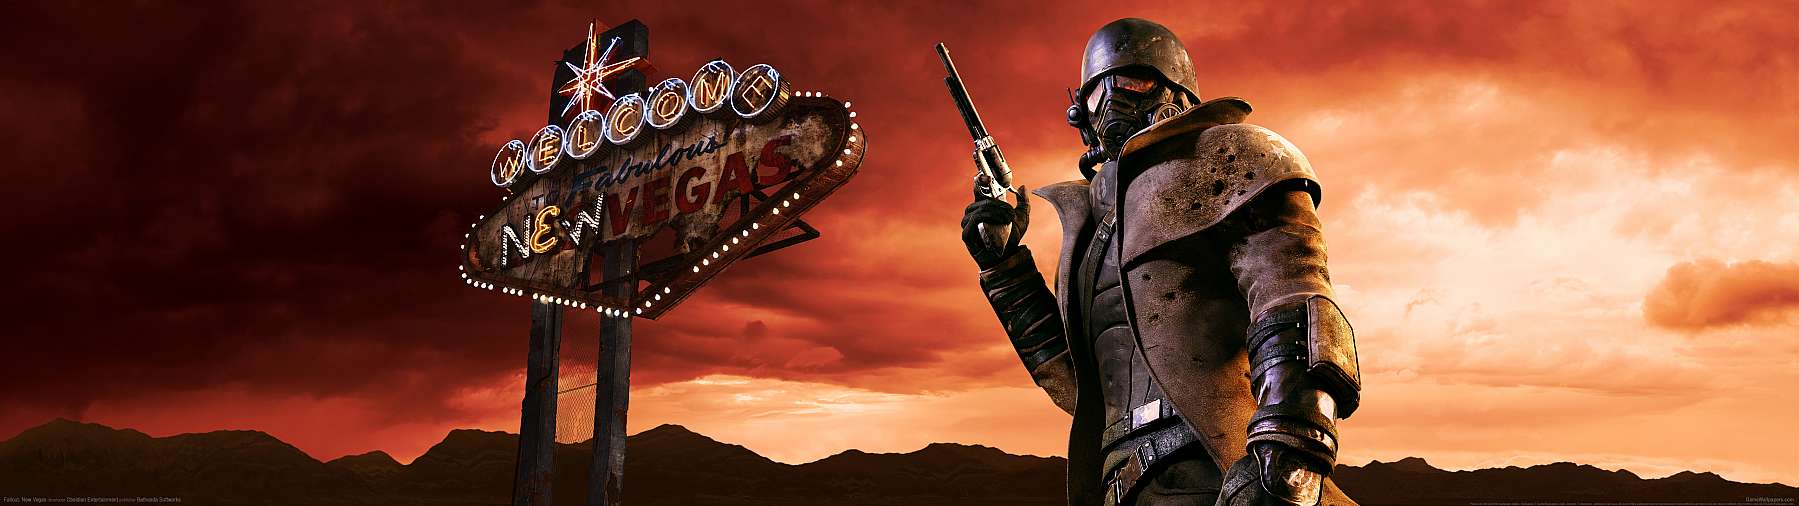 Fallout: New Vegas superwide achtergrond 01